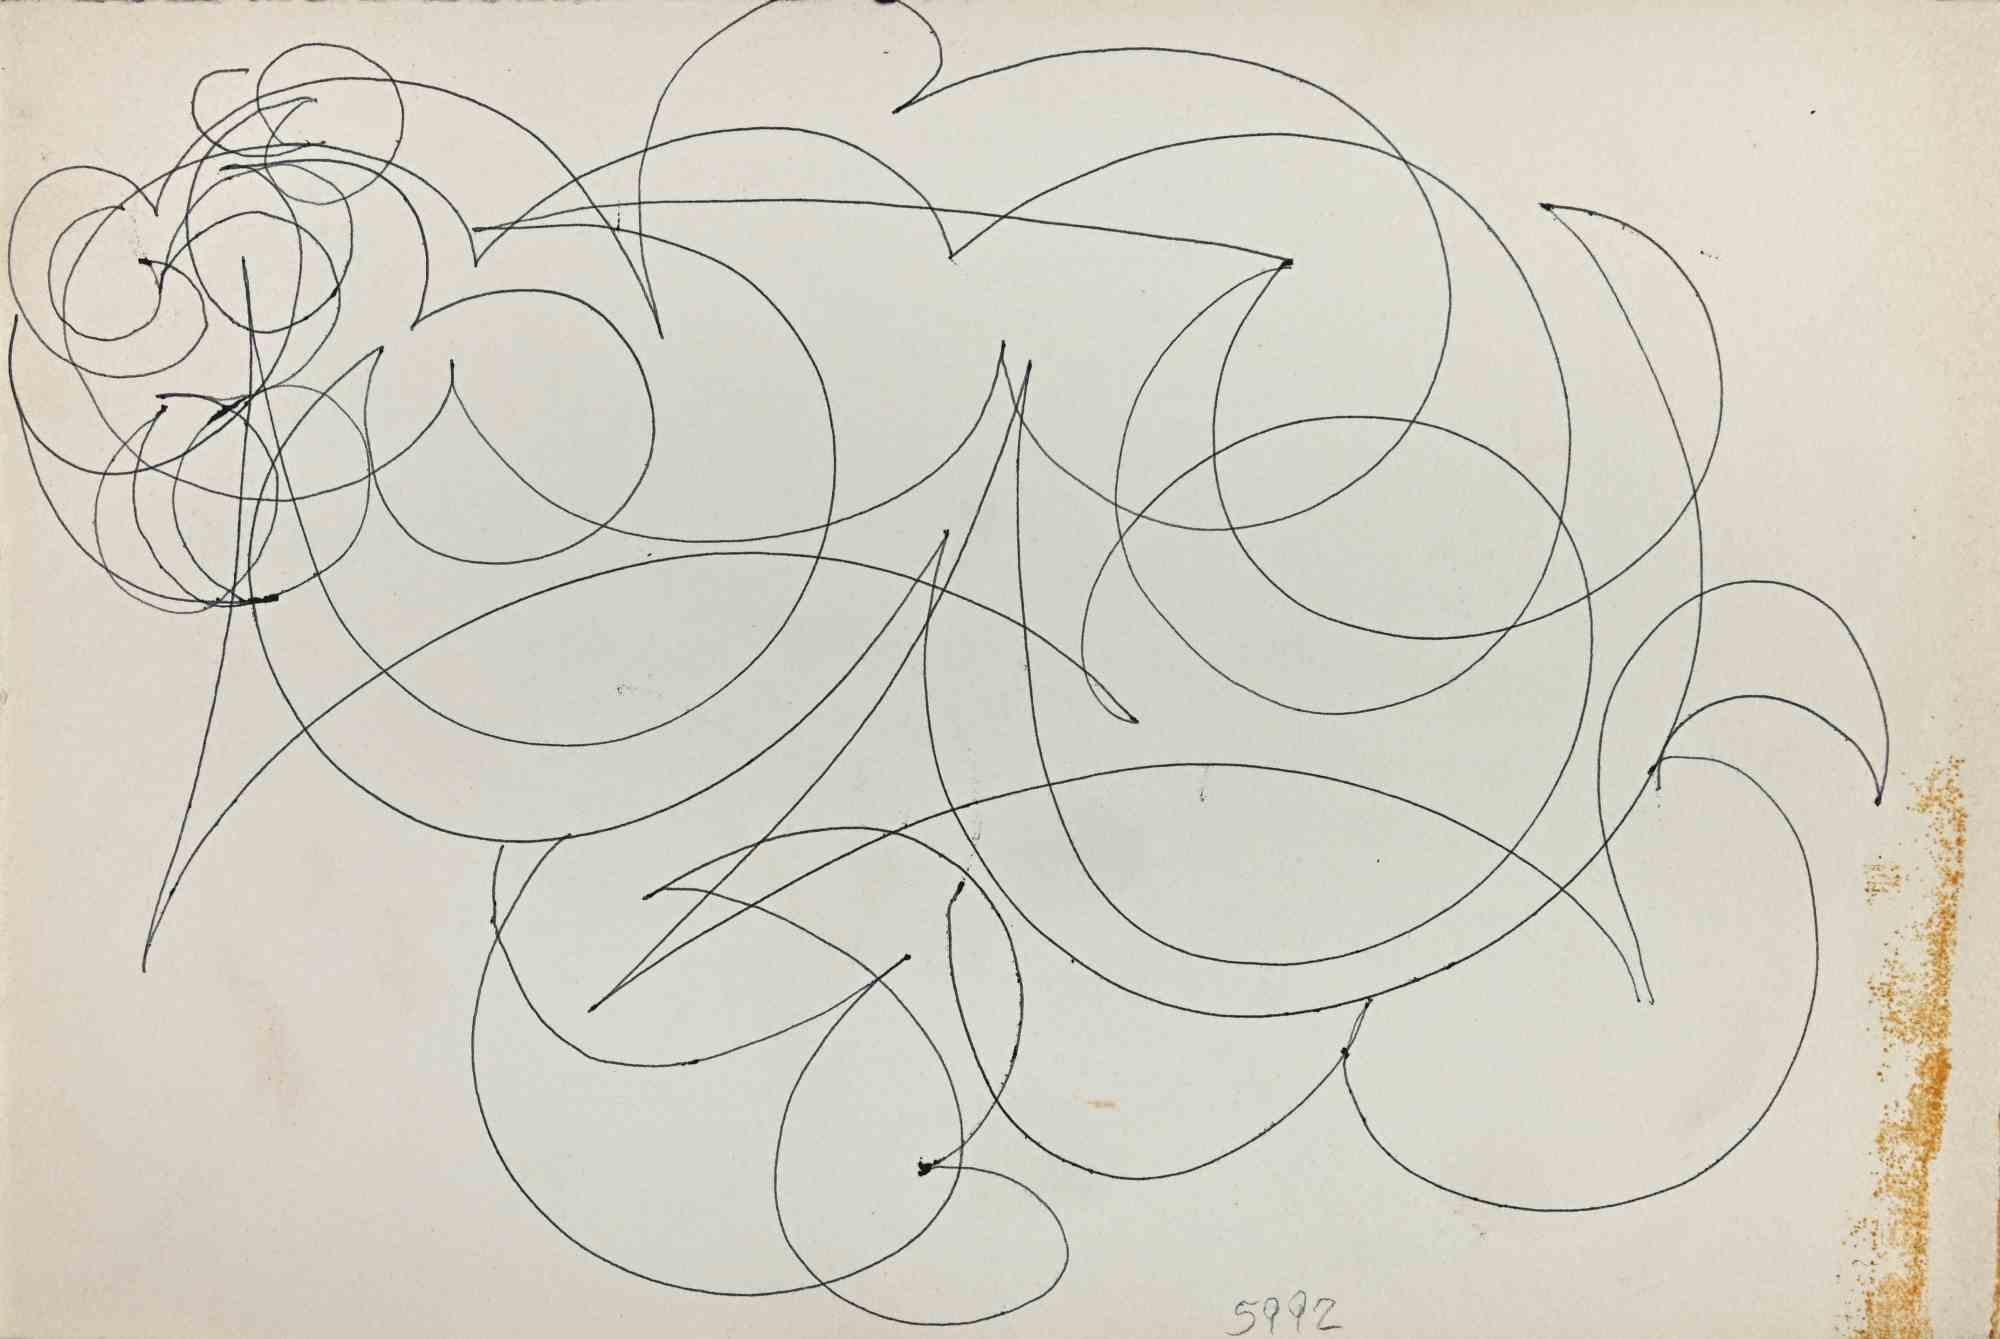 Abstract composition is an original artwork realized by Michel Cadoret.

China ink on paper.

The monogram of the artist is on the lower center. The back of the artwork is sketched as well.

Good conditions.

Michel Cadoret (Paris, 1912 – Cerny,